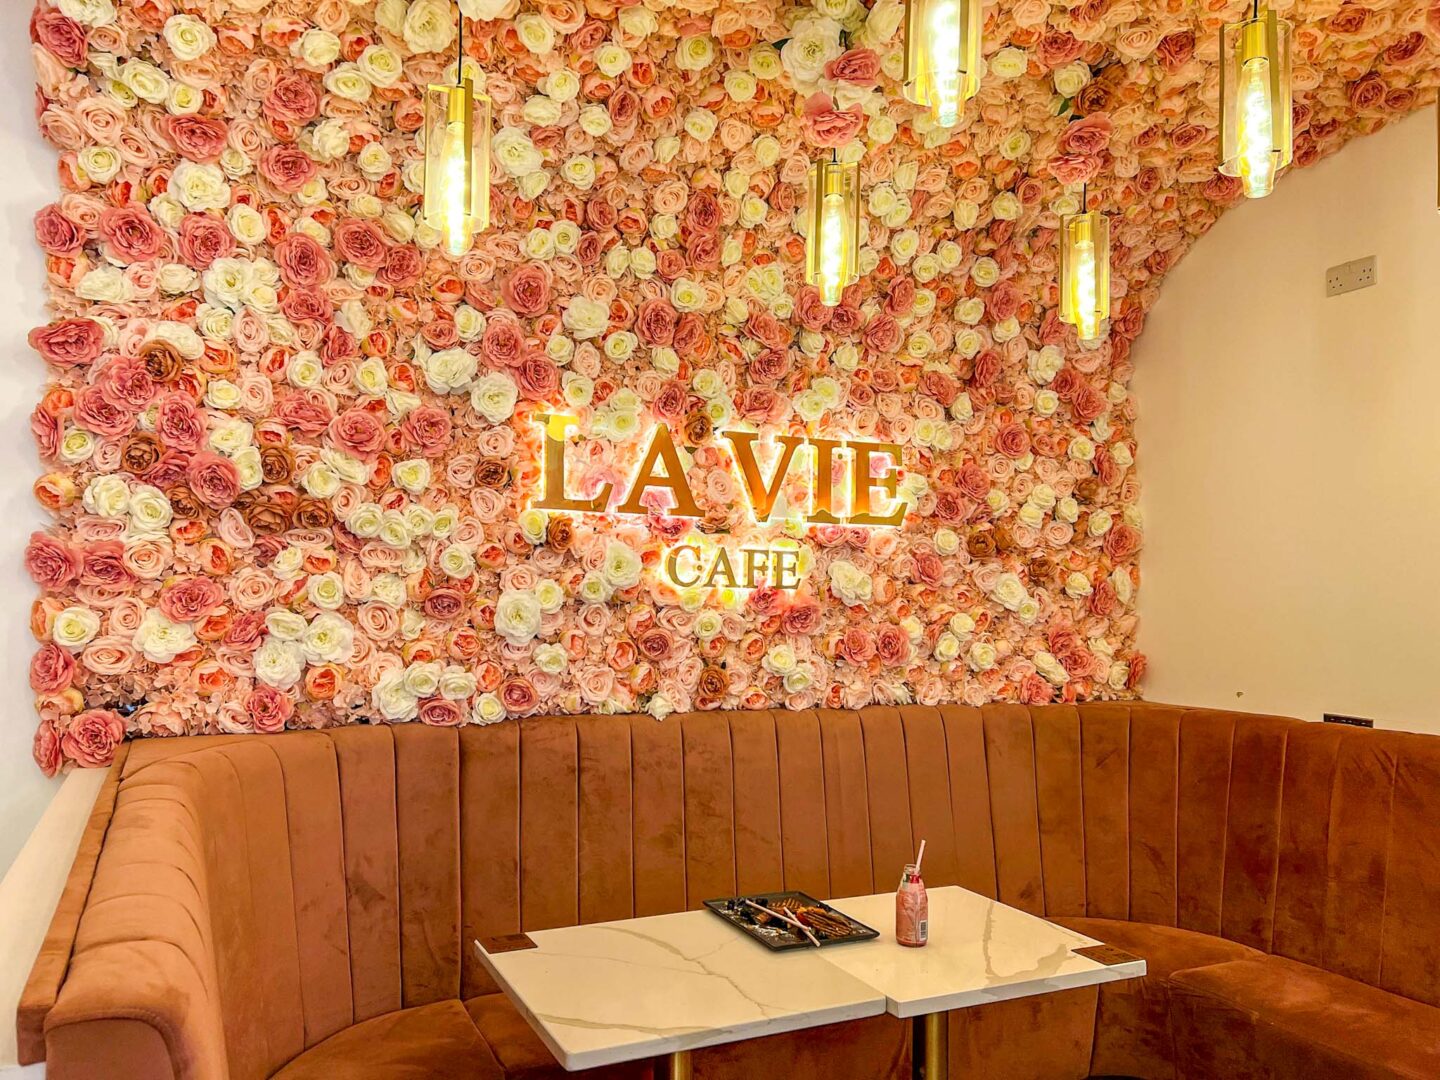 Halal brunch manchester, Inside La Vie Cafe with flowers on wall